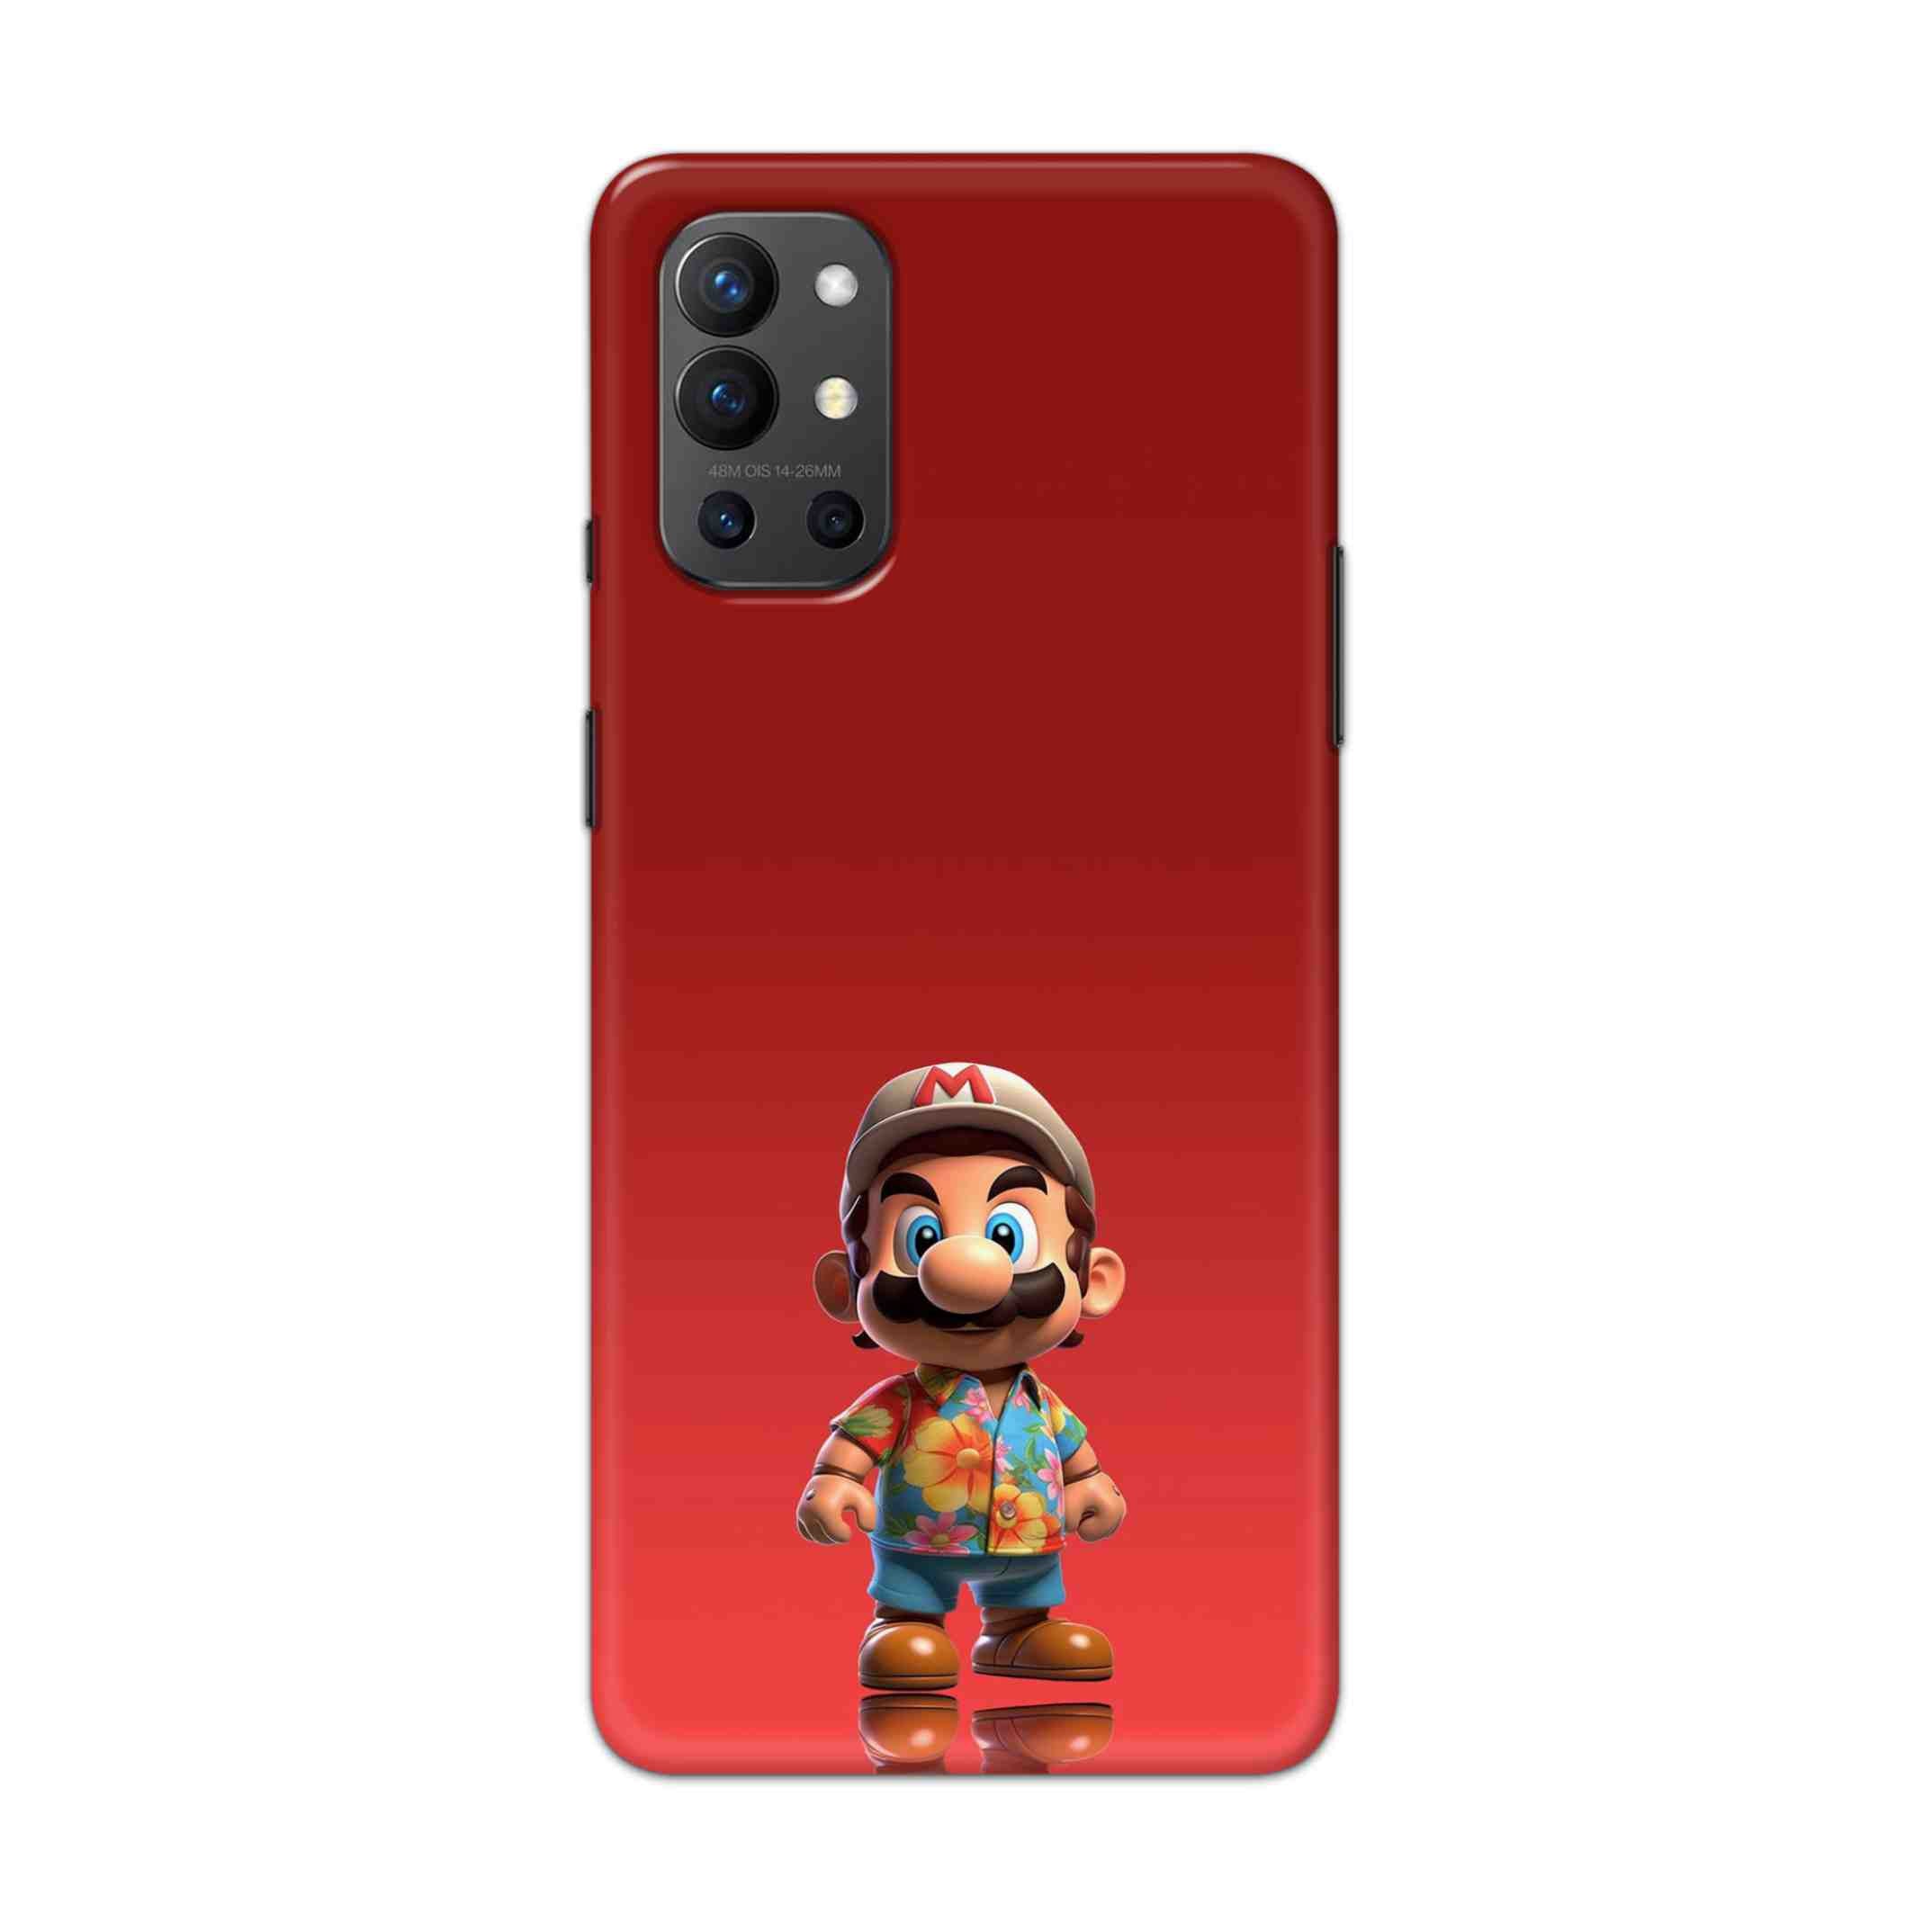 Buy Mario Hard Back Mobile Phone Case Cover For OnePlus 9R / 8T Online